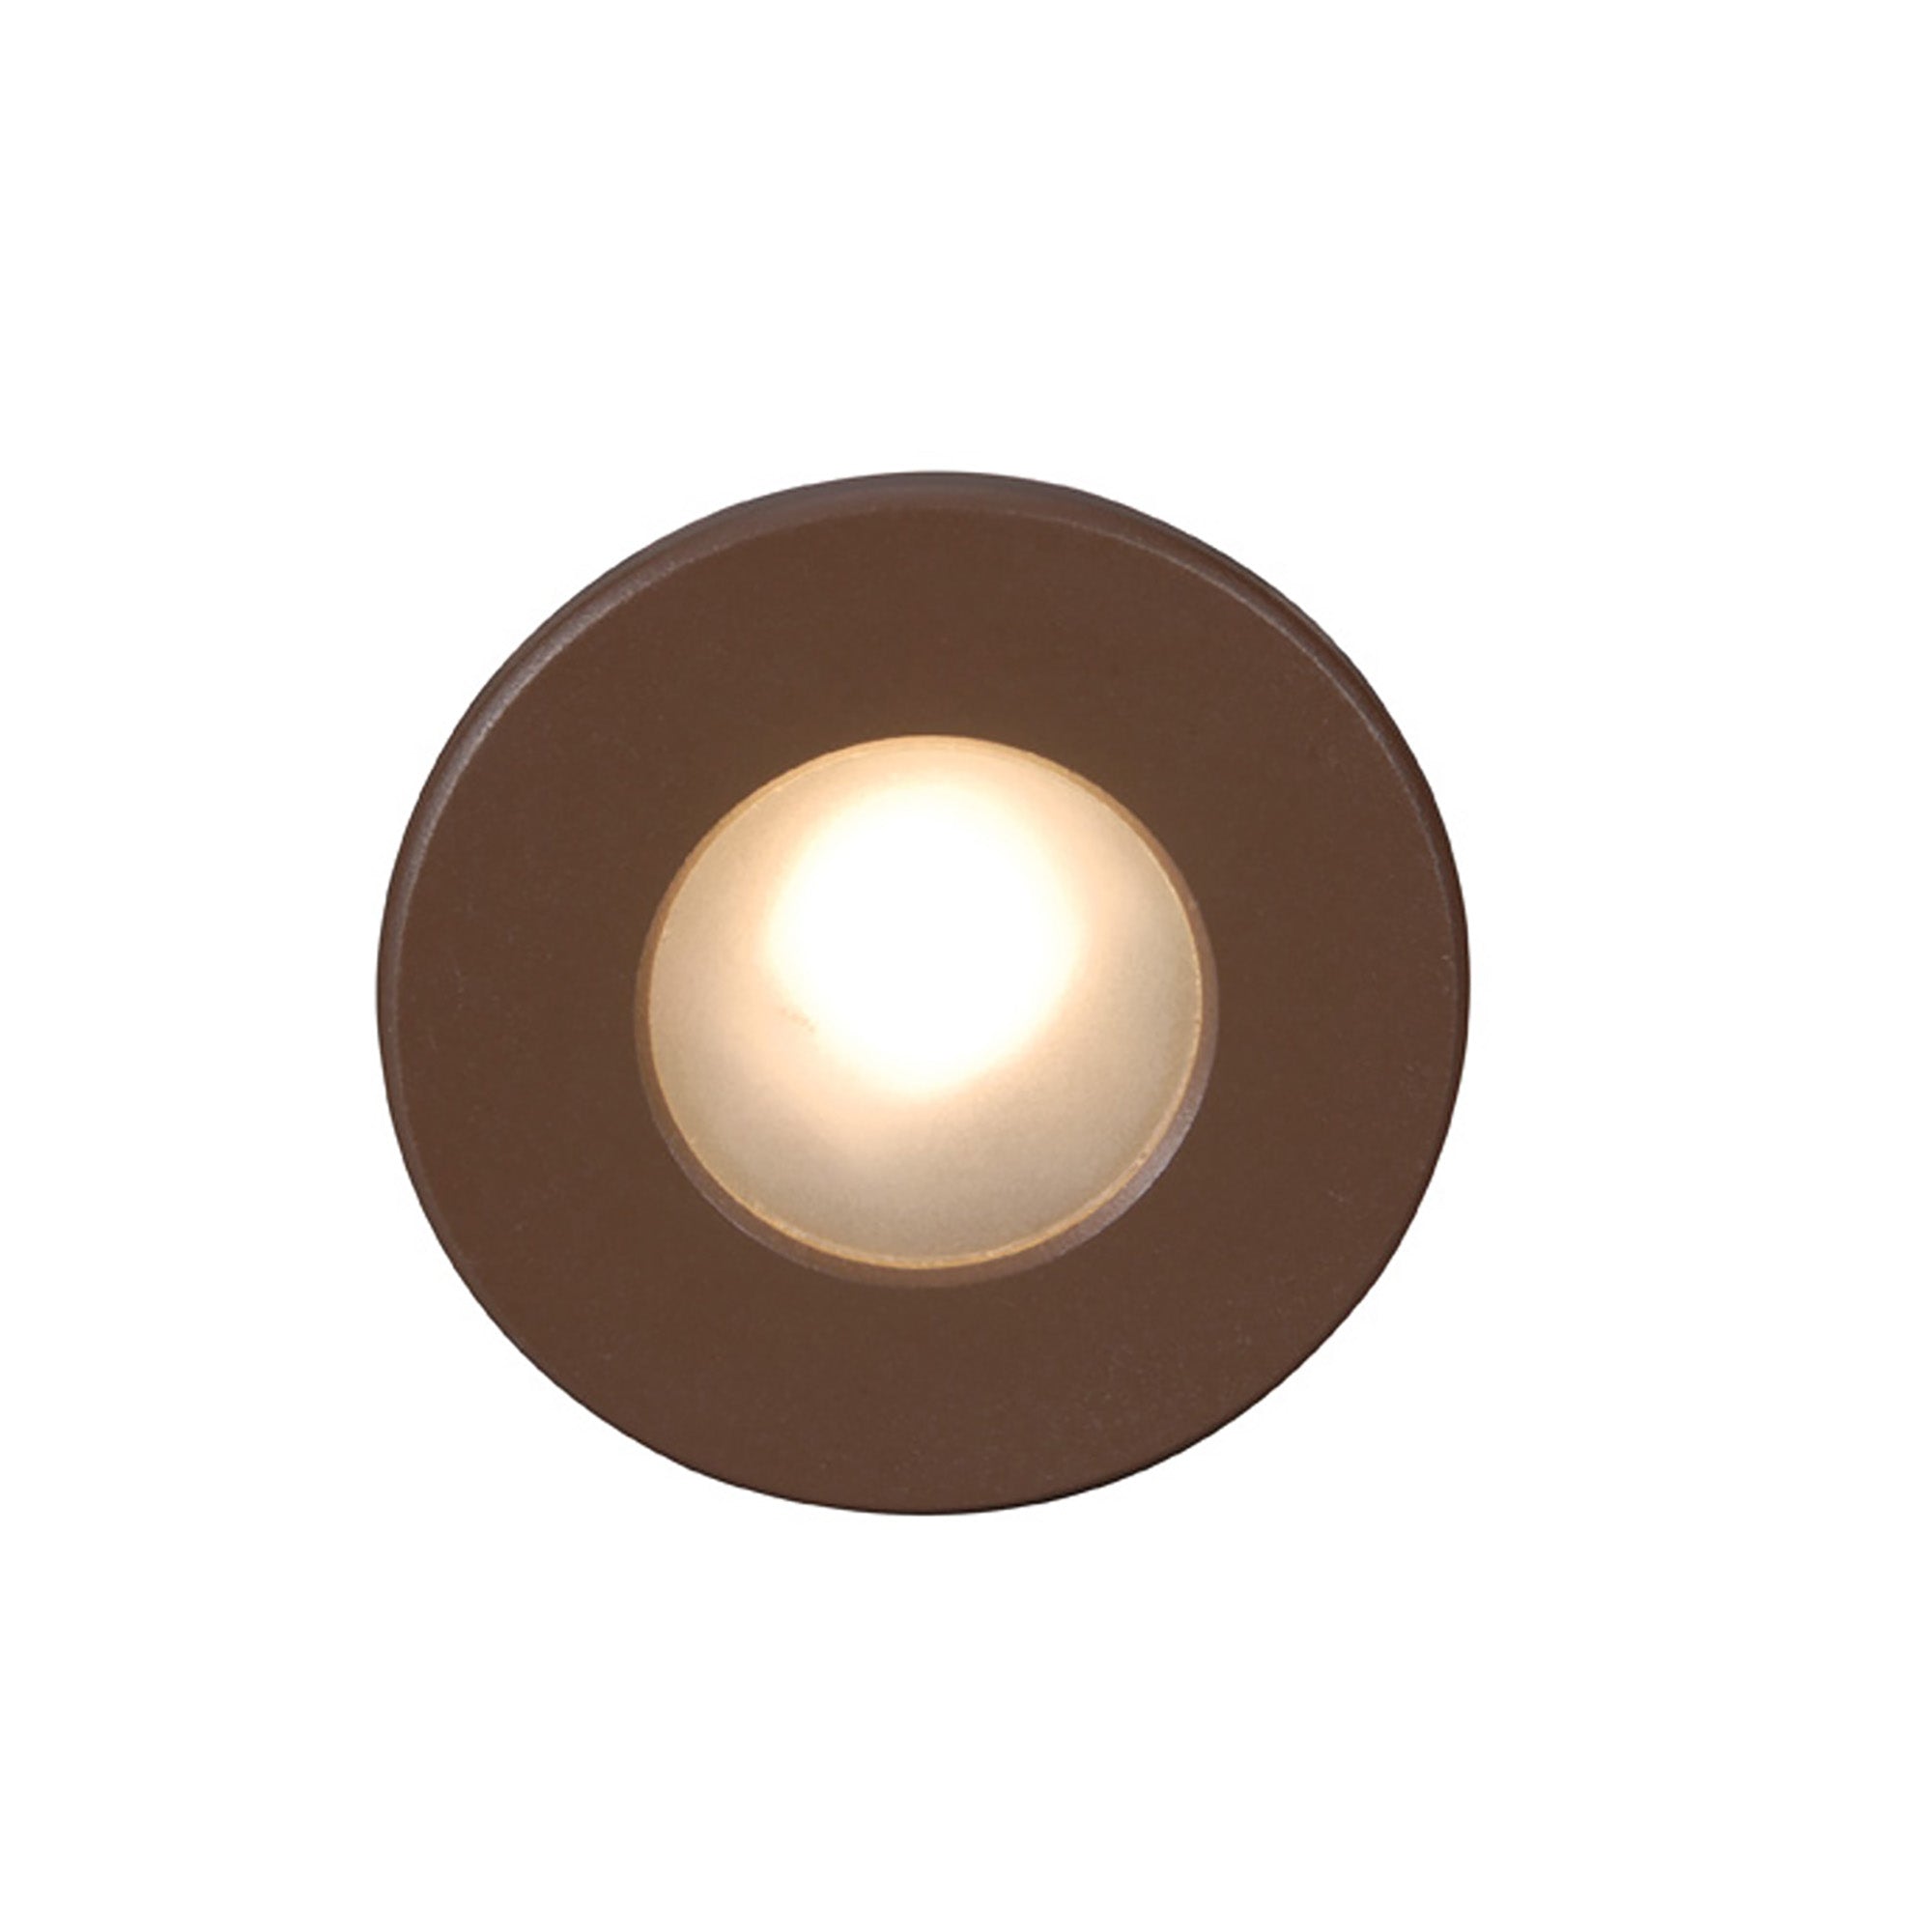 LEDme 120V LED Full Round Indoor/Outdoor Step and Wall Light